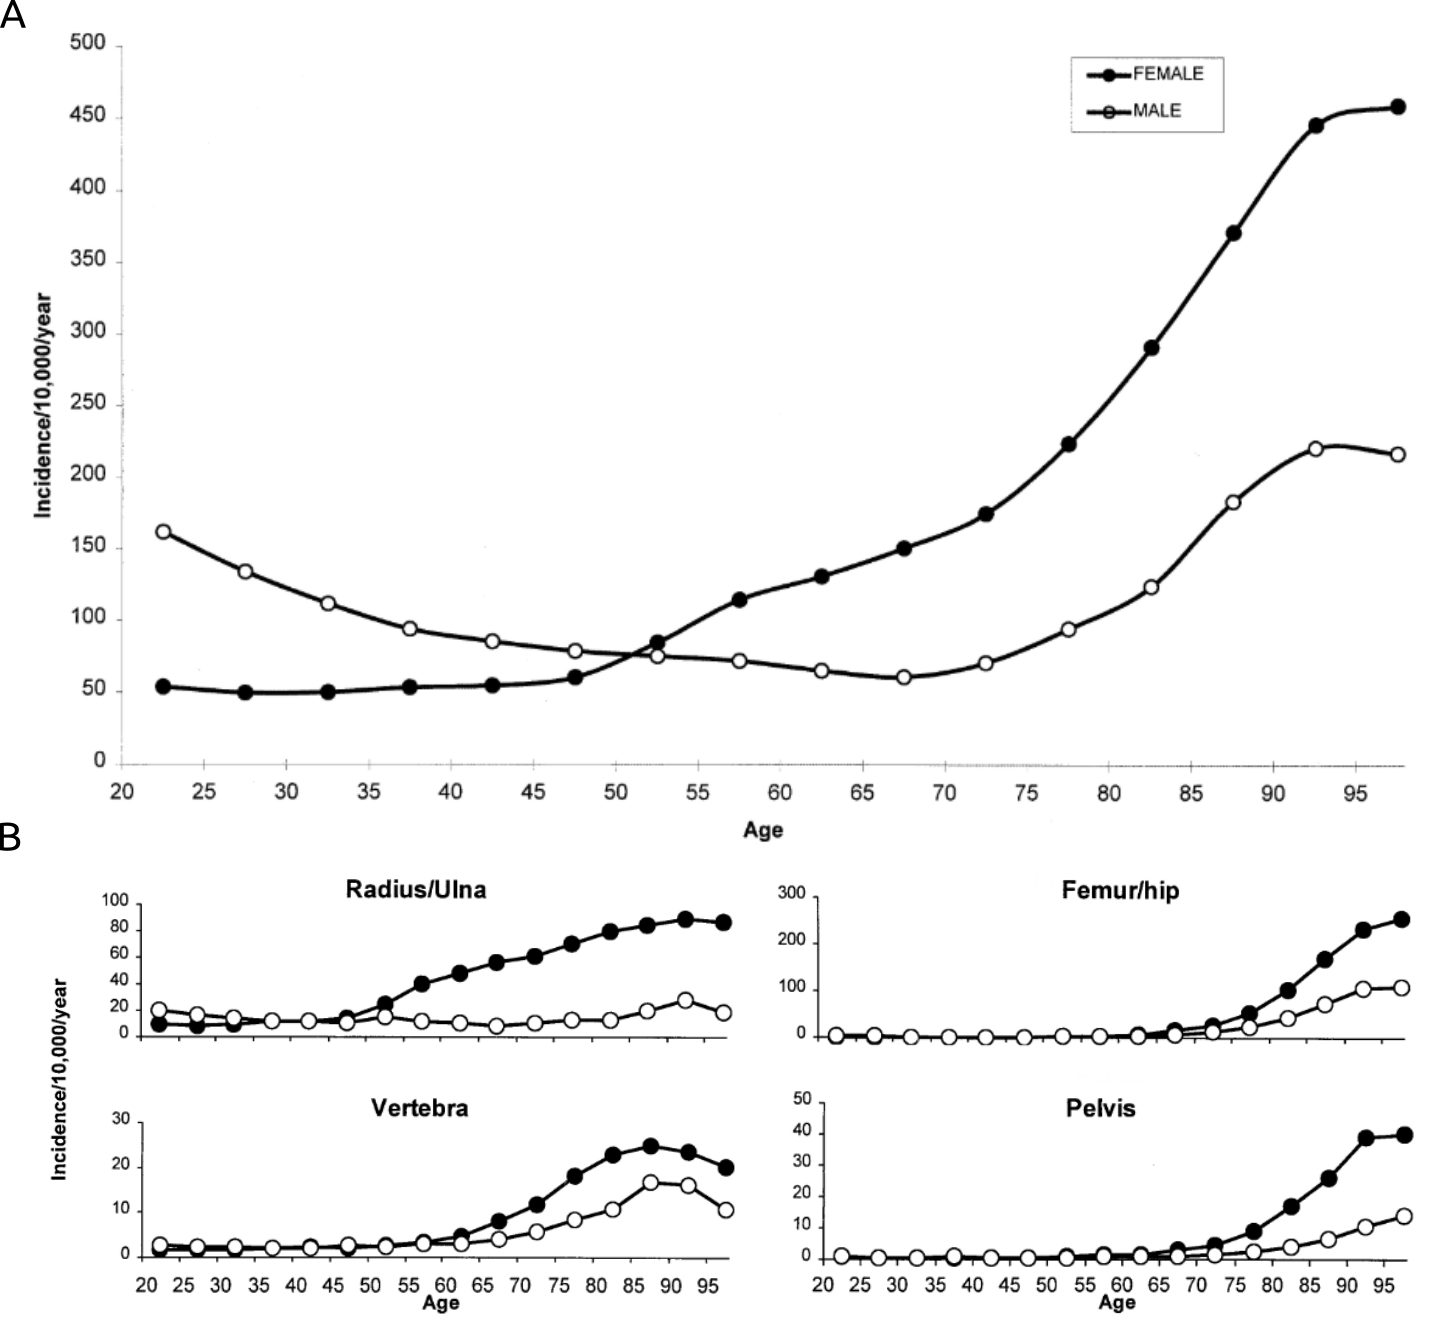 Overall Fracture Incidence Increases With Age Data from 5 million adults in the General Practice Research Database 1988-1998. A Incidence of all fractures at any site by sex and age. B Fractures by sex and age at select sites, pelvis, Femur/Hip & Vertebra confer the greatest increased mortality rates and Radius/Ulna has the greatest sexual dimorphism. (Adapted from van Staa et al. [238].)